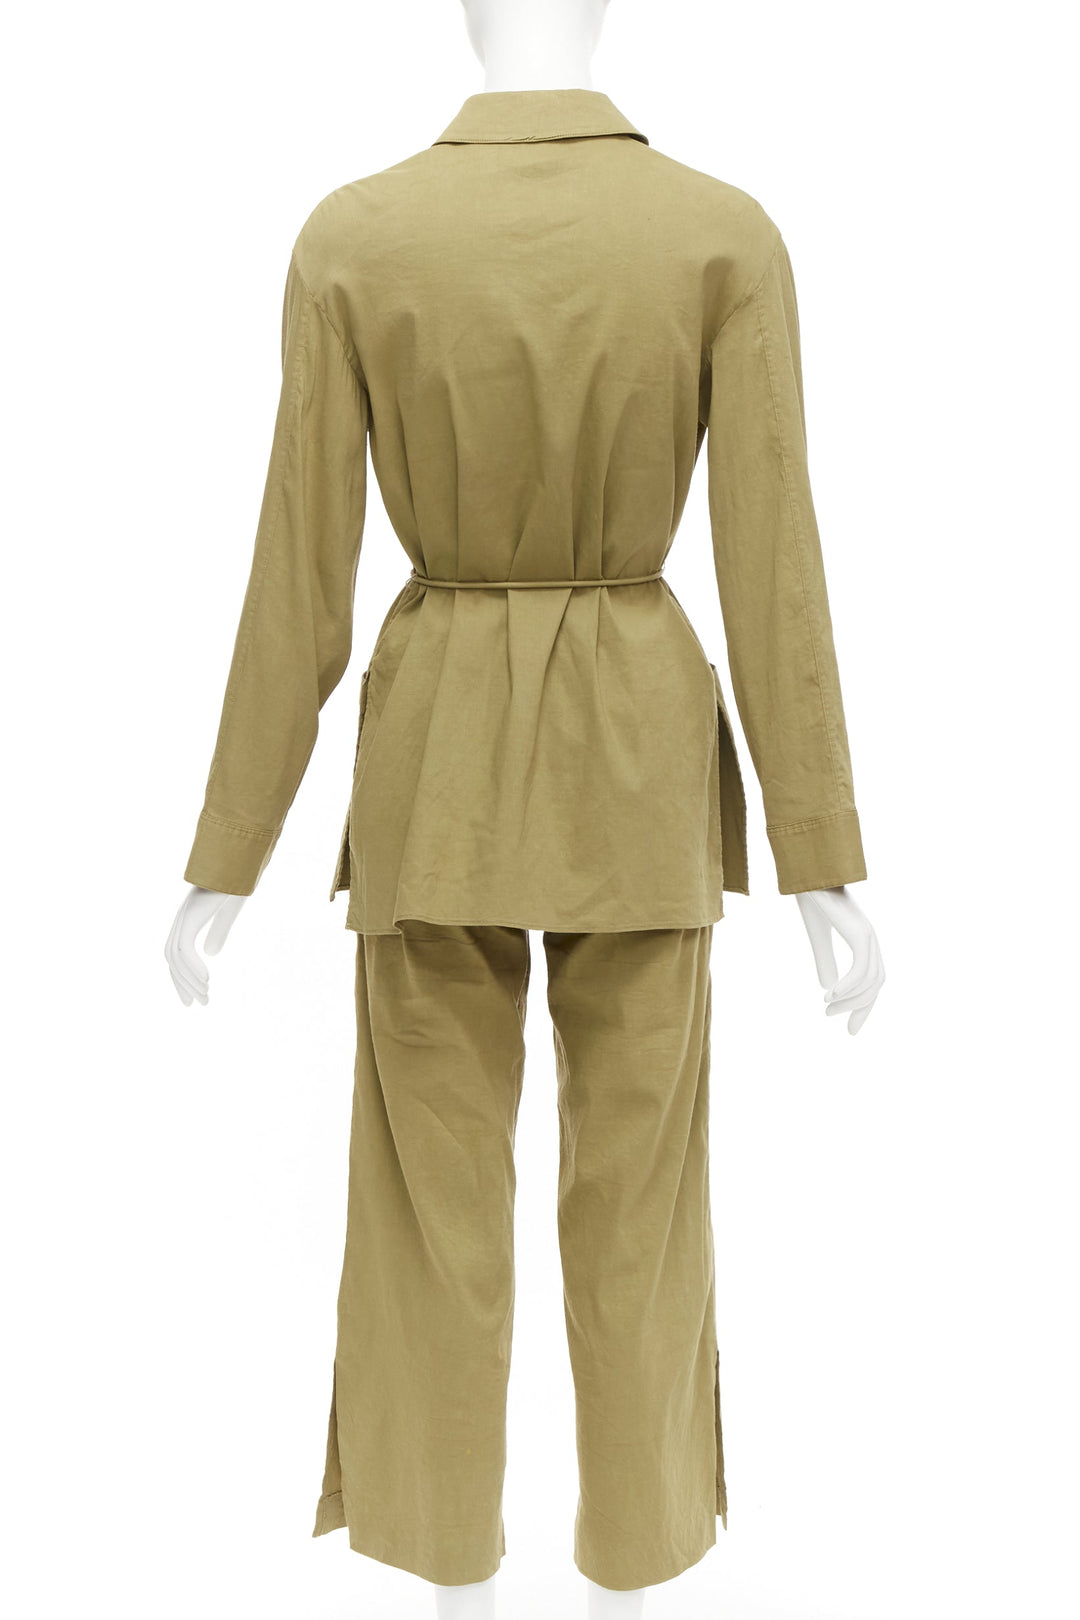 THEORY olive green linen blend tie belt relaxed jacket wide leg pants set US0 XS